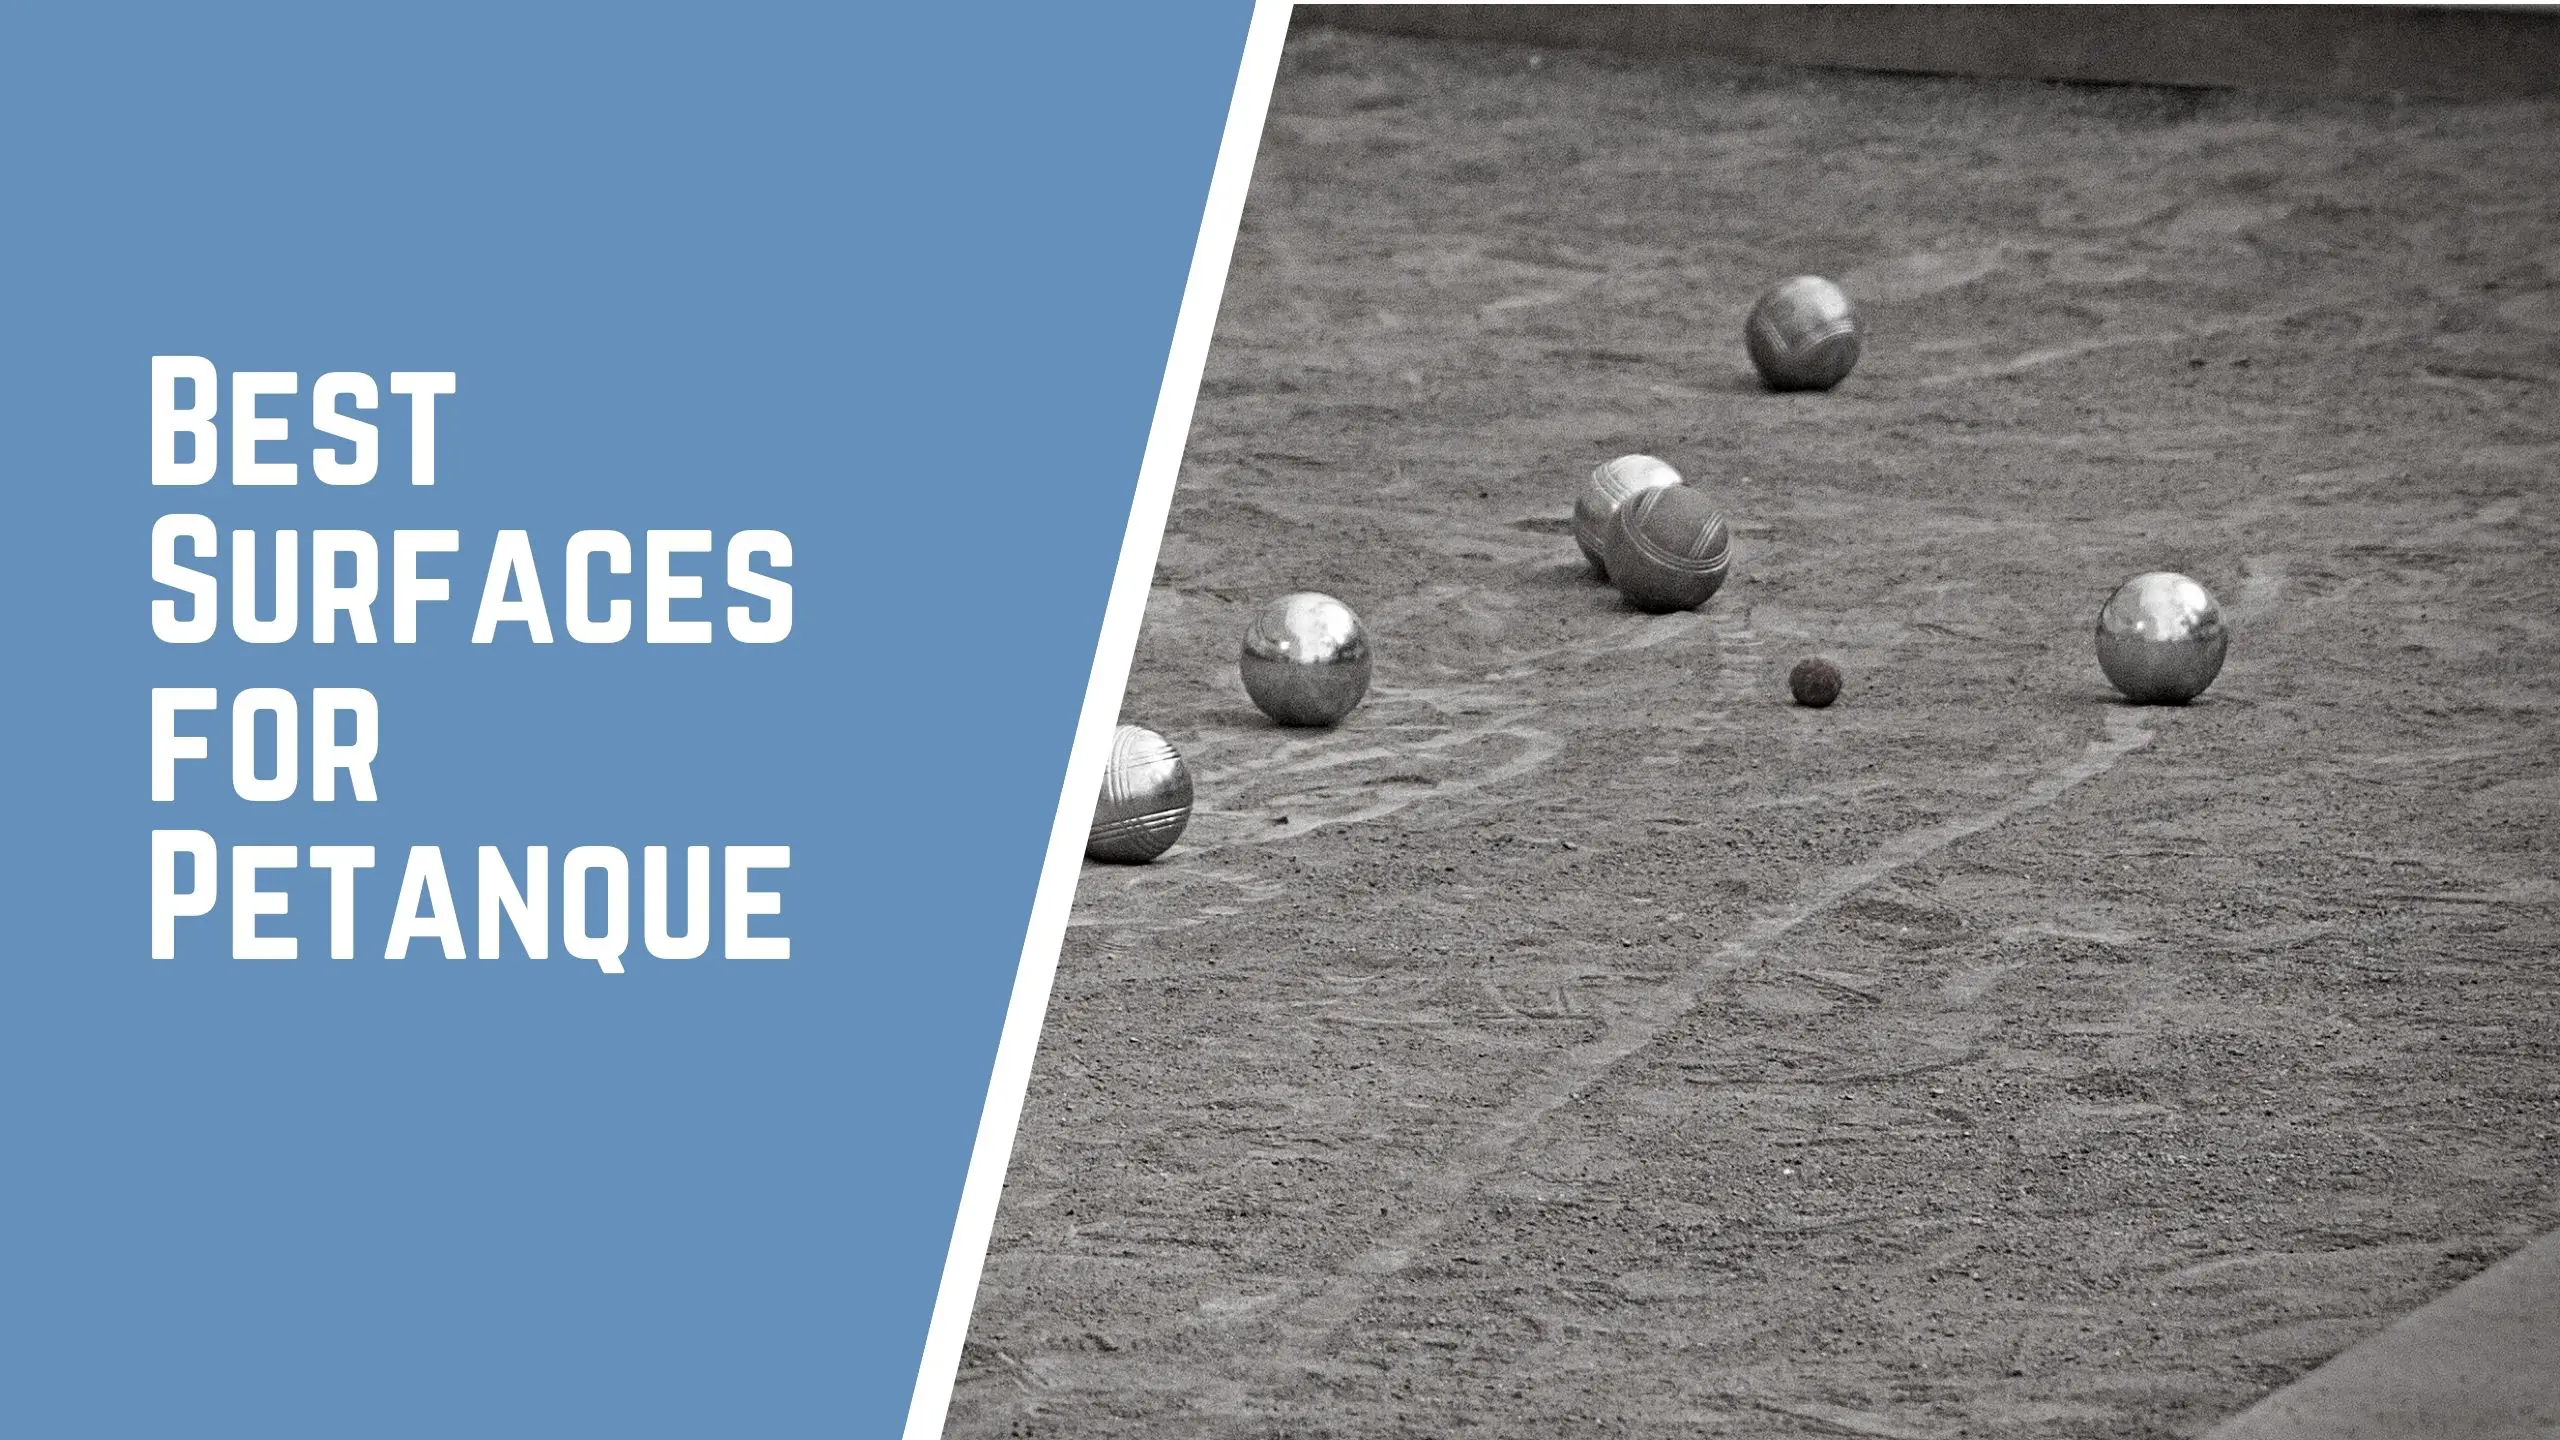 The Best Surfaces for Petanque